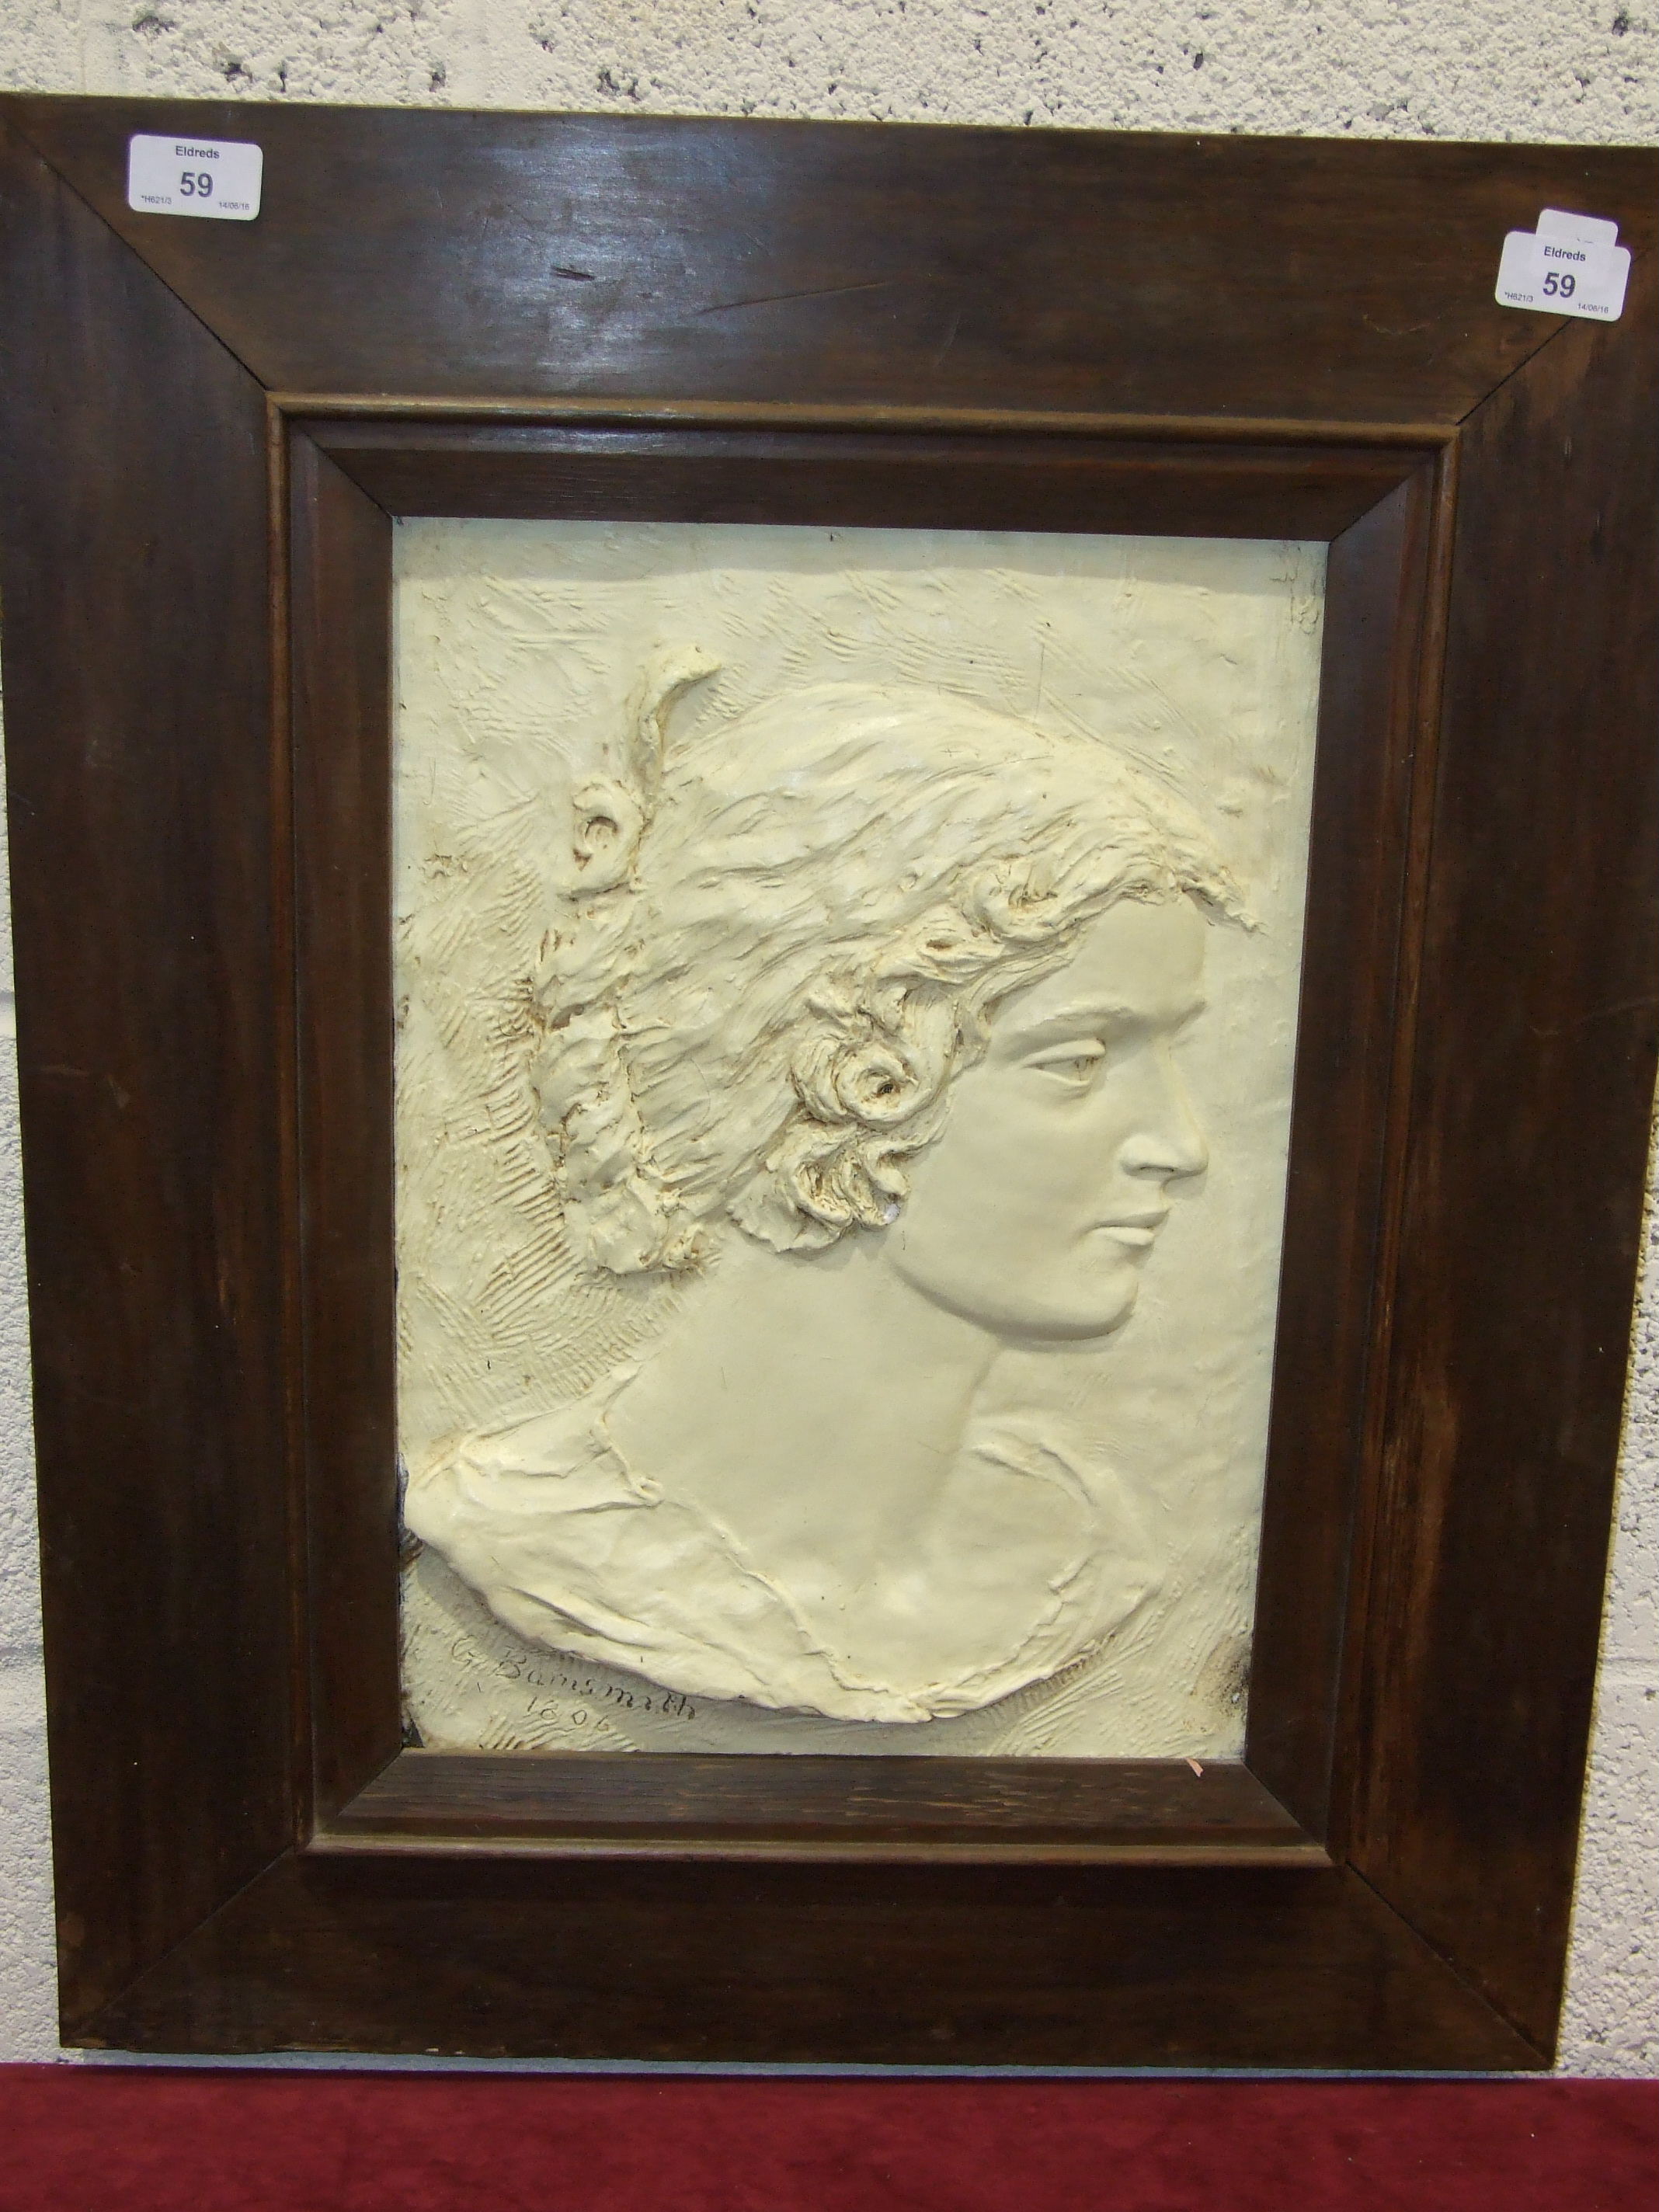 G Barnsmith, a bronzed plaster plaque bust of a young woman, signed and dated, 1806, 39.5 x 28cm.